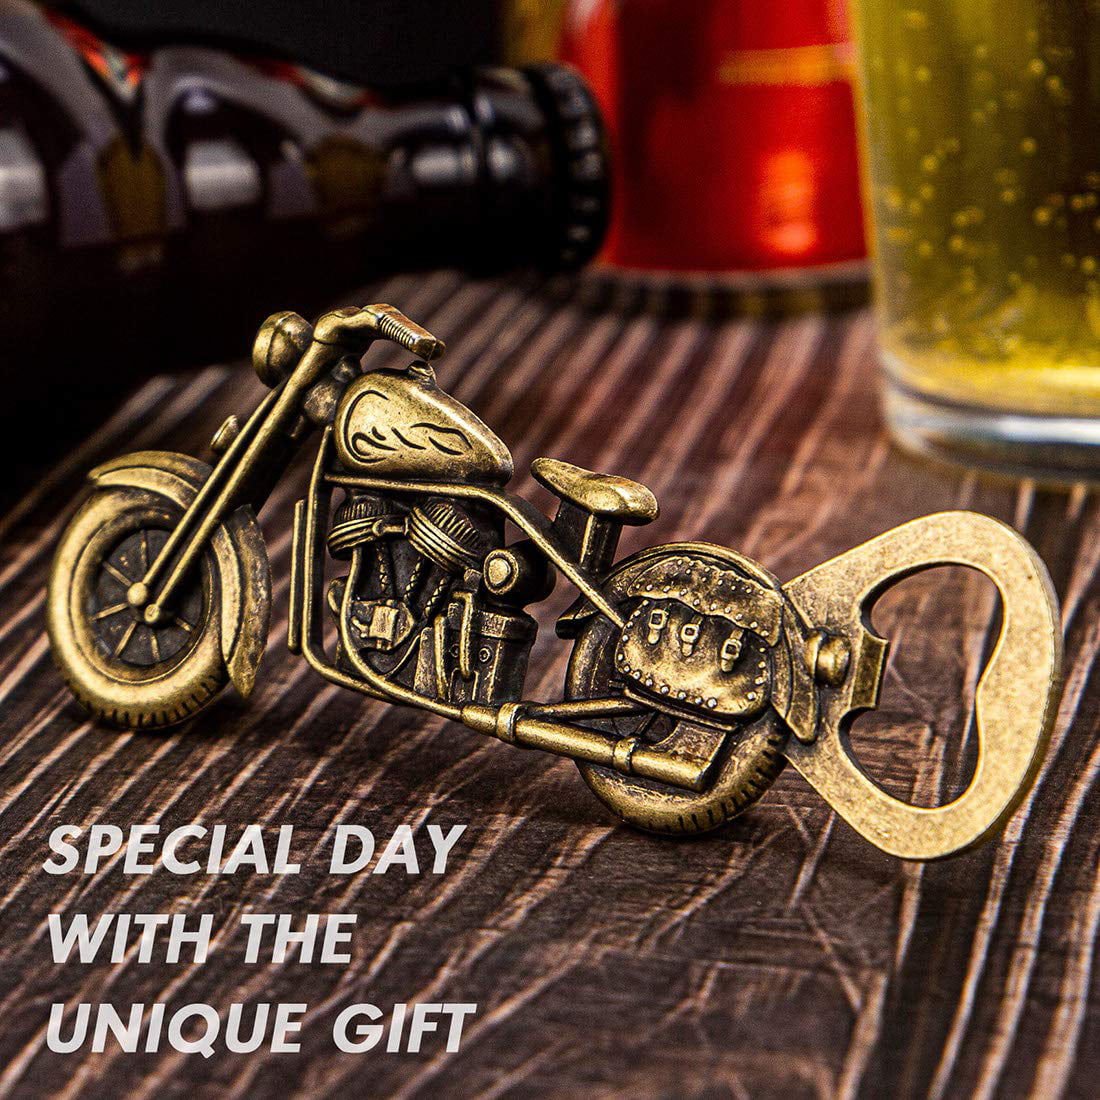 Fathers Day Gift Birthday Christmas Gift for Him Dad Husband Grandpa Boyfriend Unique Motorcycle Beer Gifts for Men Vintage Motorcycle Bottle Opener